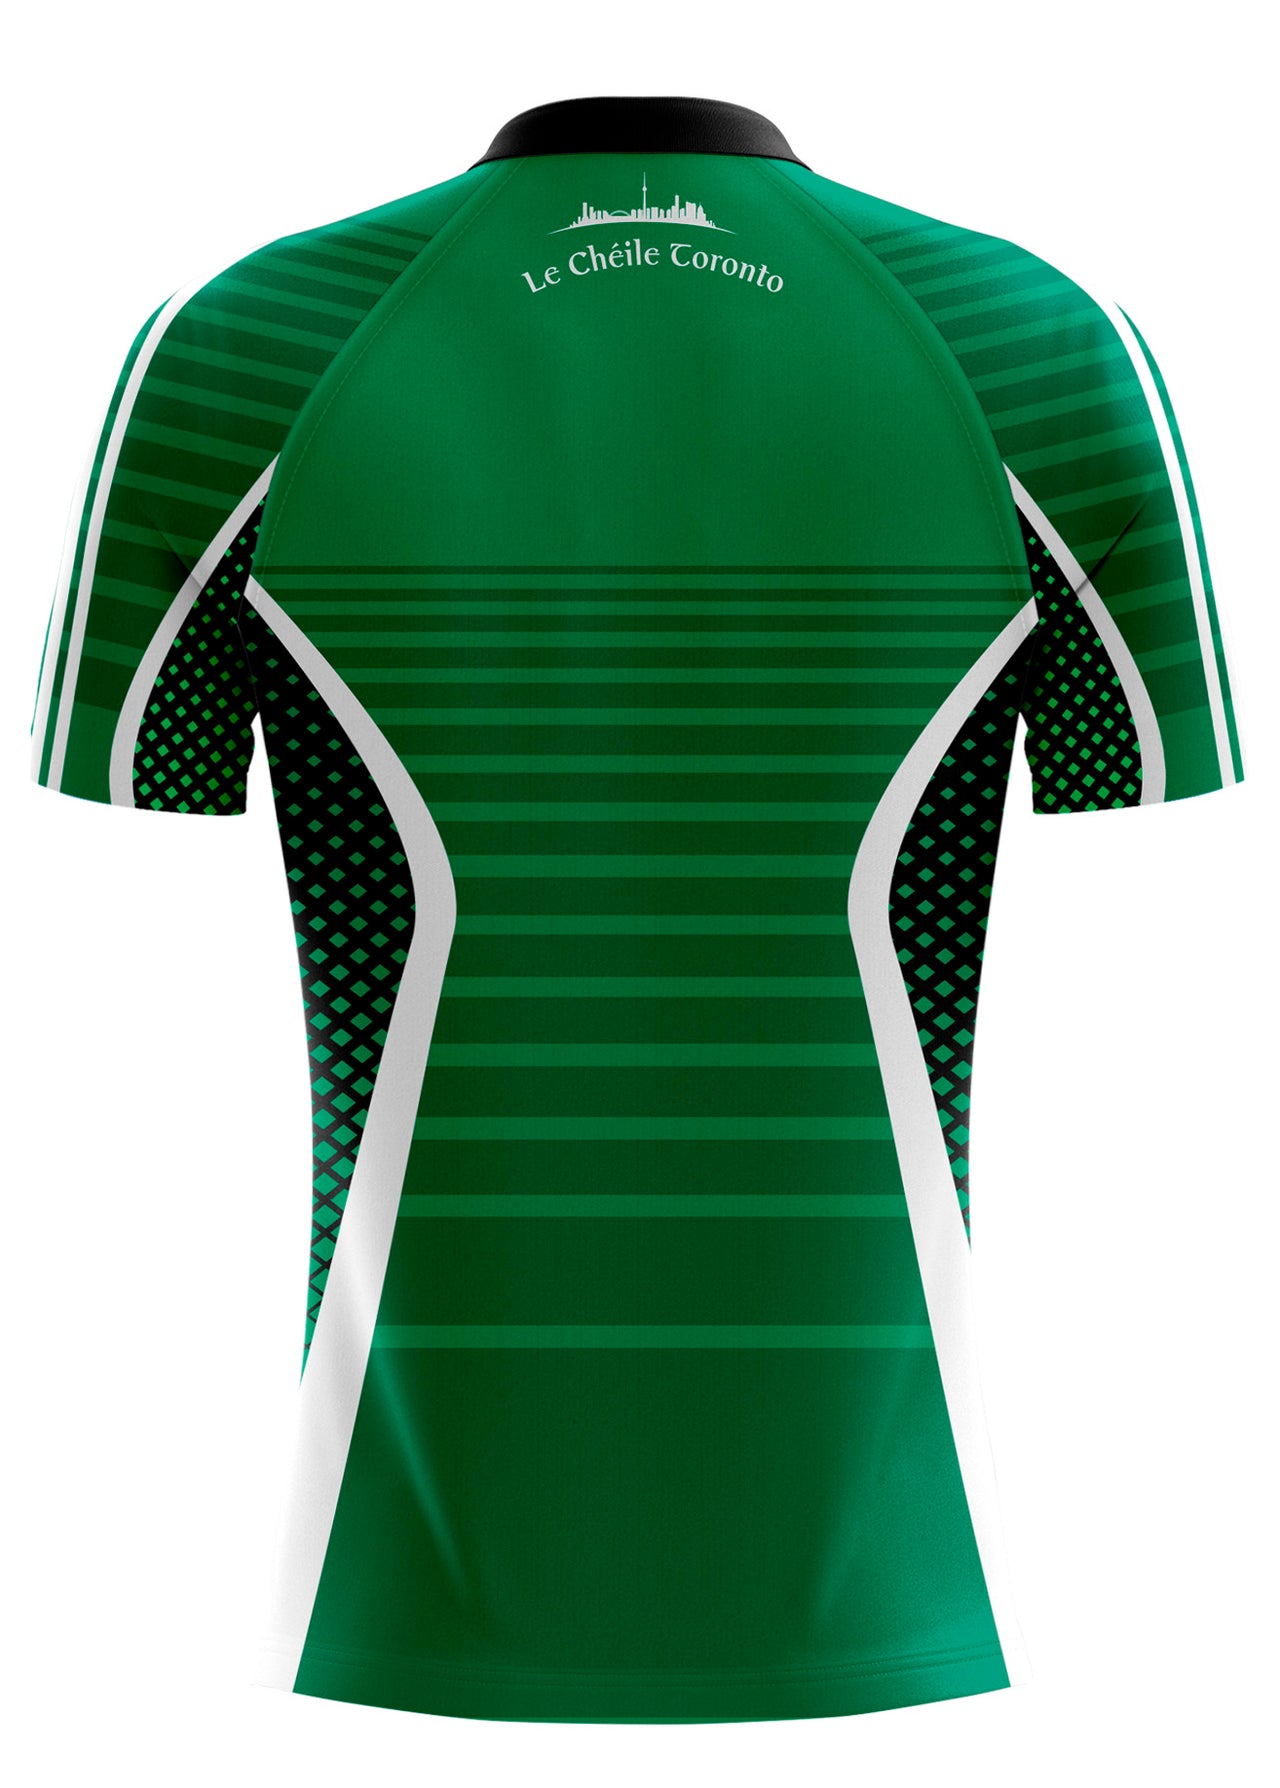 Le Cheile Camogie Home Jersey Regular Fit Adult